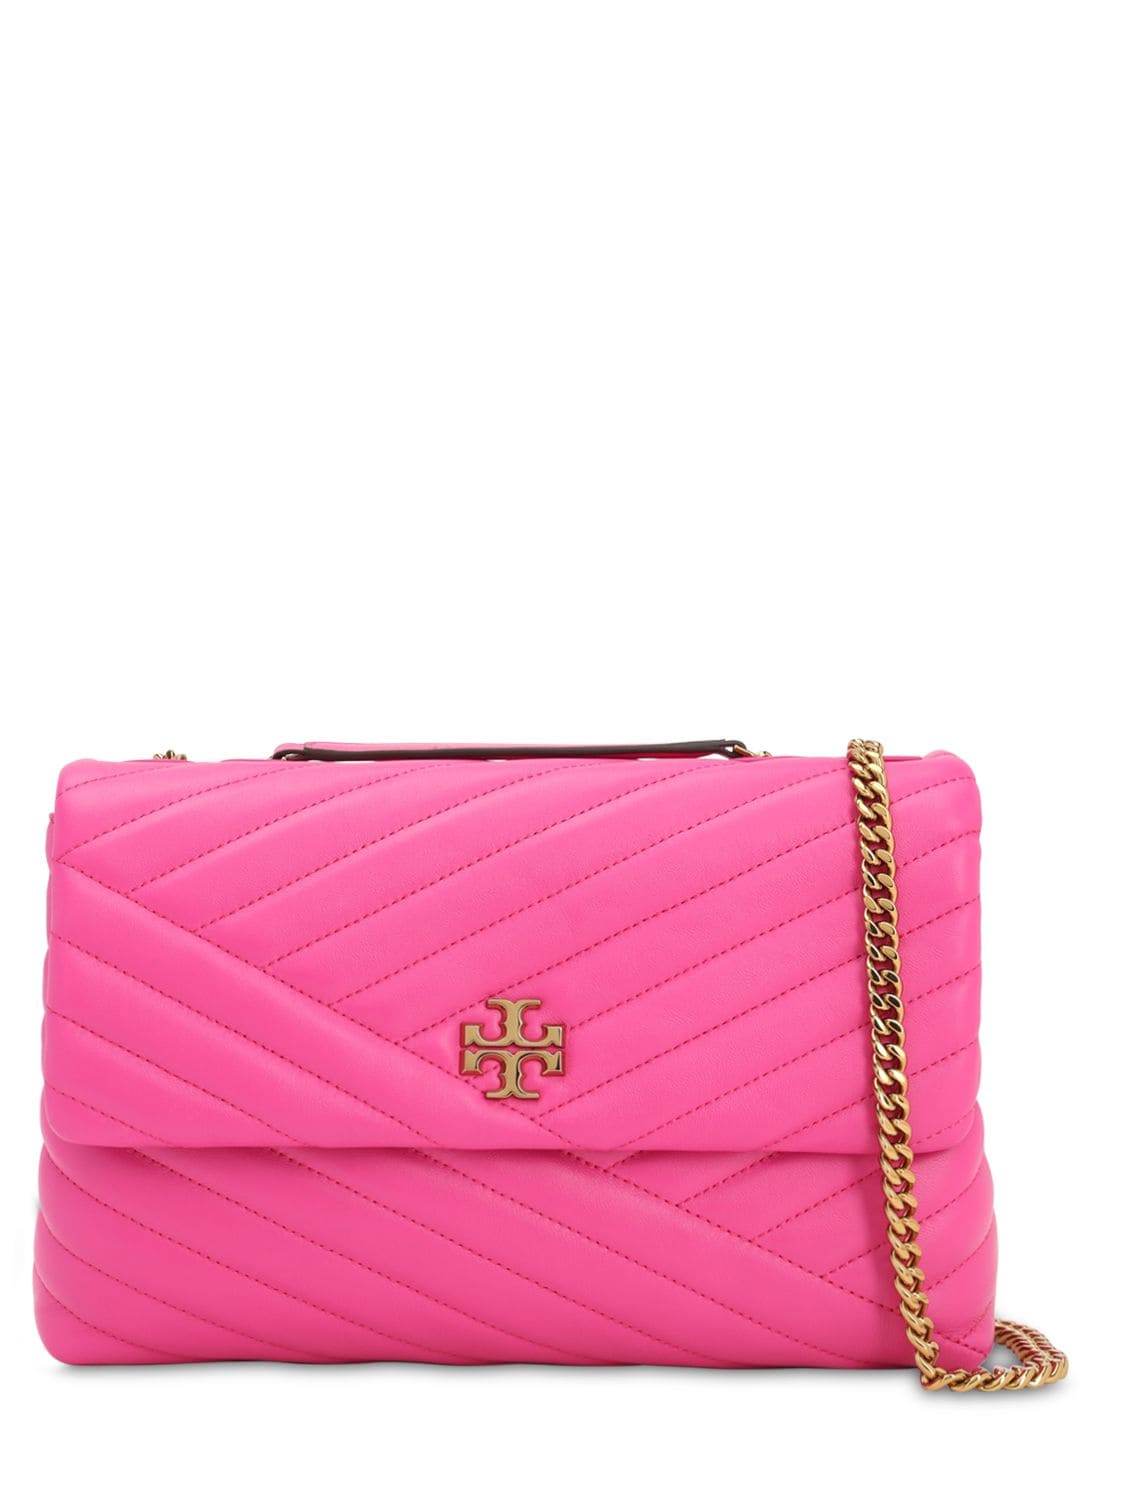 Tory Burch Kira Chevron Quilted Leather Bag In Crazy Pink